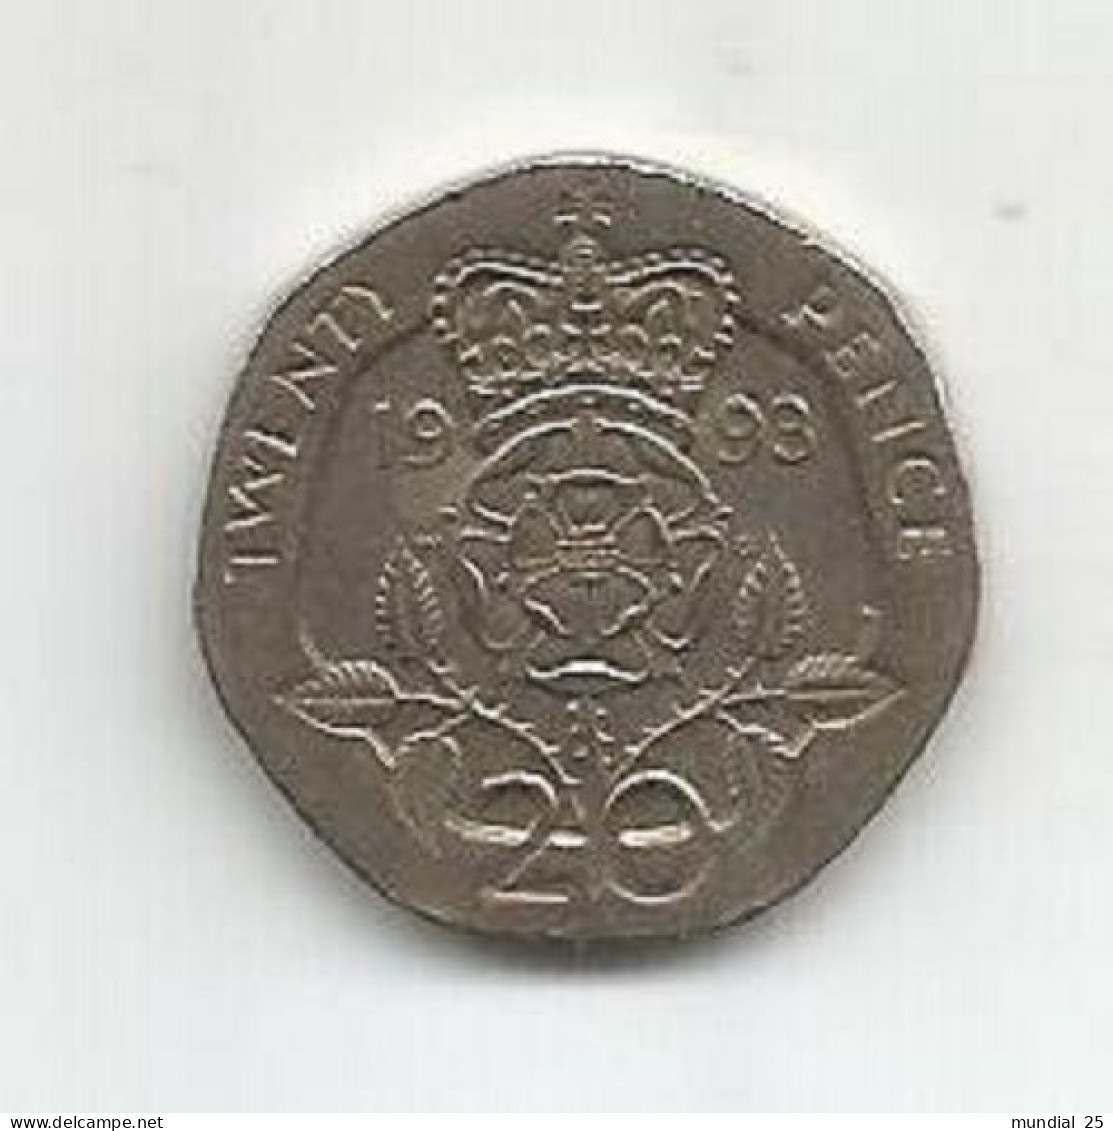 GREAT BRITAIN 20 PENCE 1993 - 20 Pence